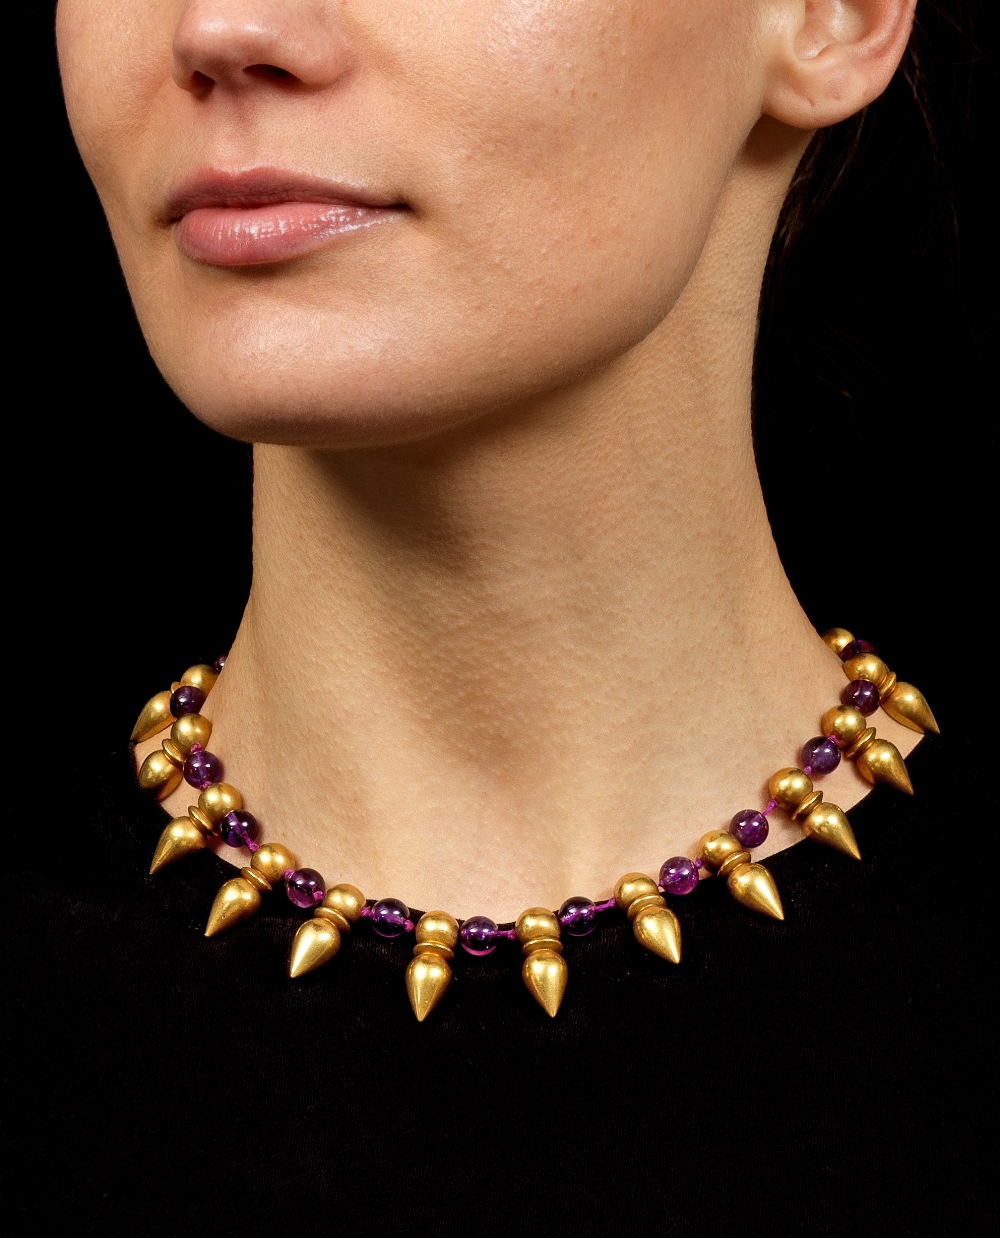 KIESELSTEIN-CORD: AMETHYST BEAD NECKLACE, CIRCA 2003 - Image 2 of 2